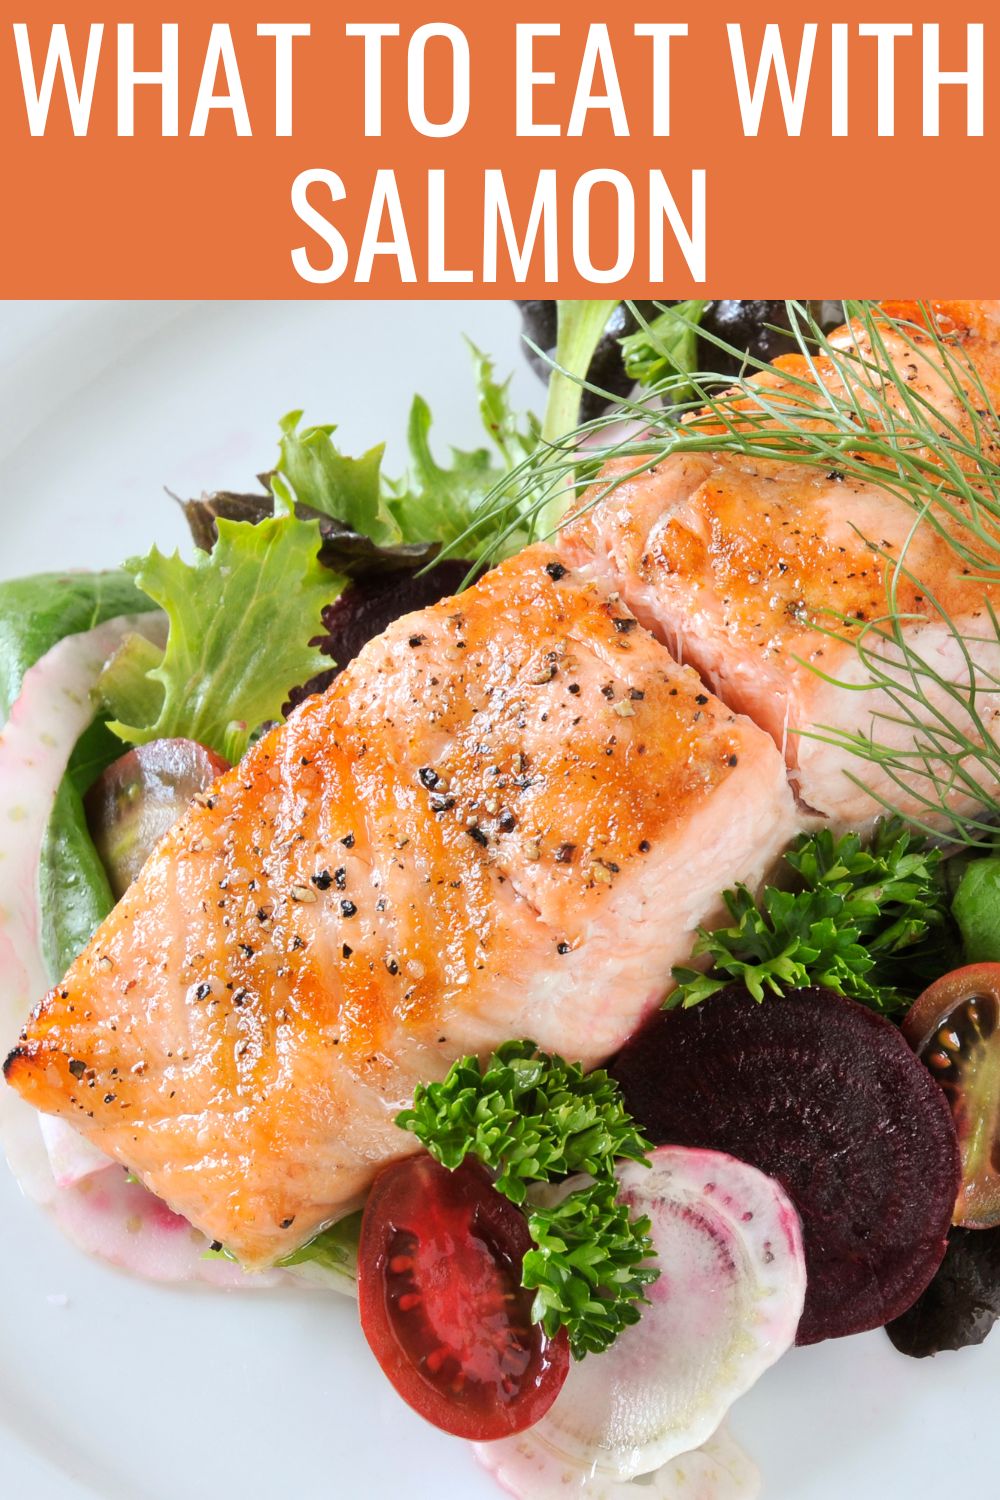 What to eat with salmon.